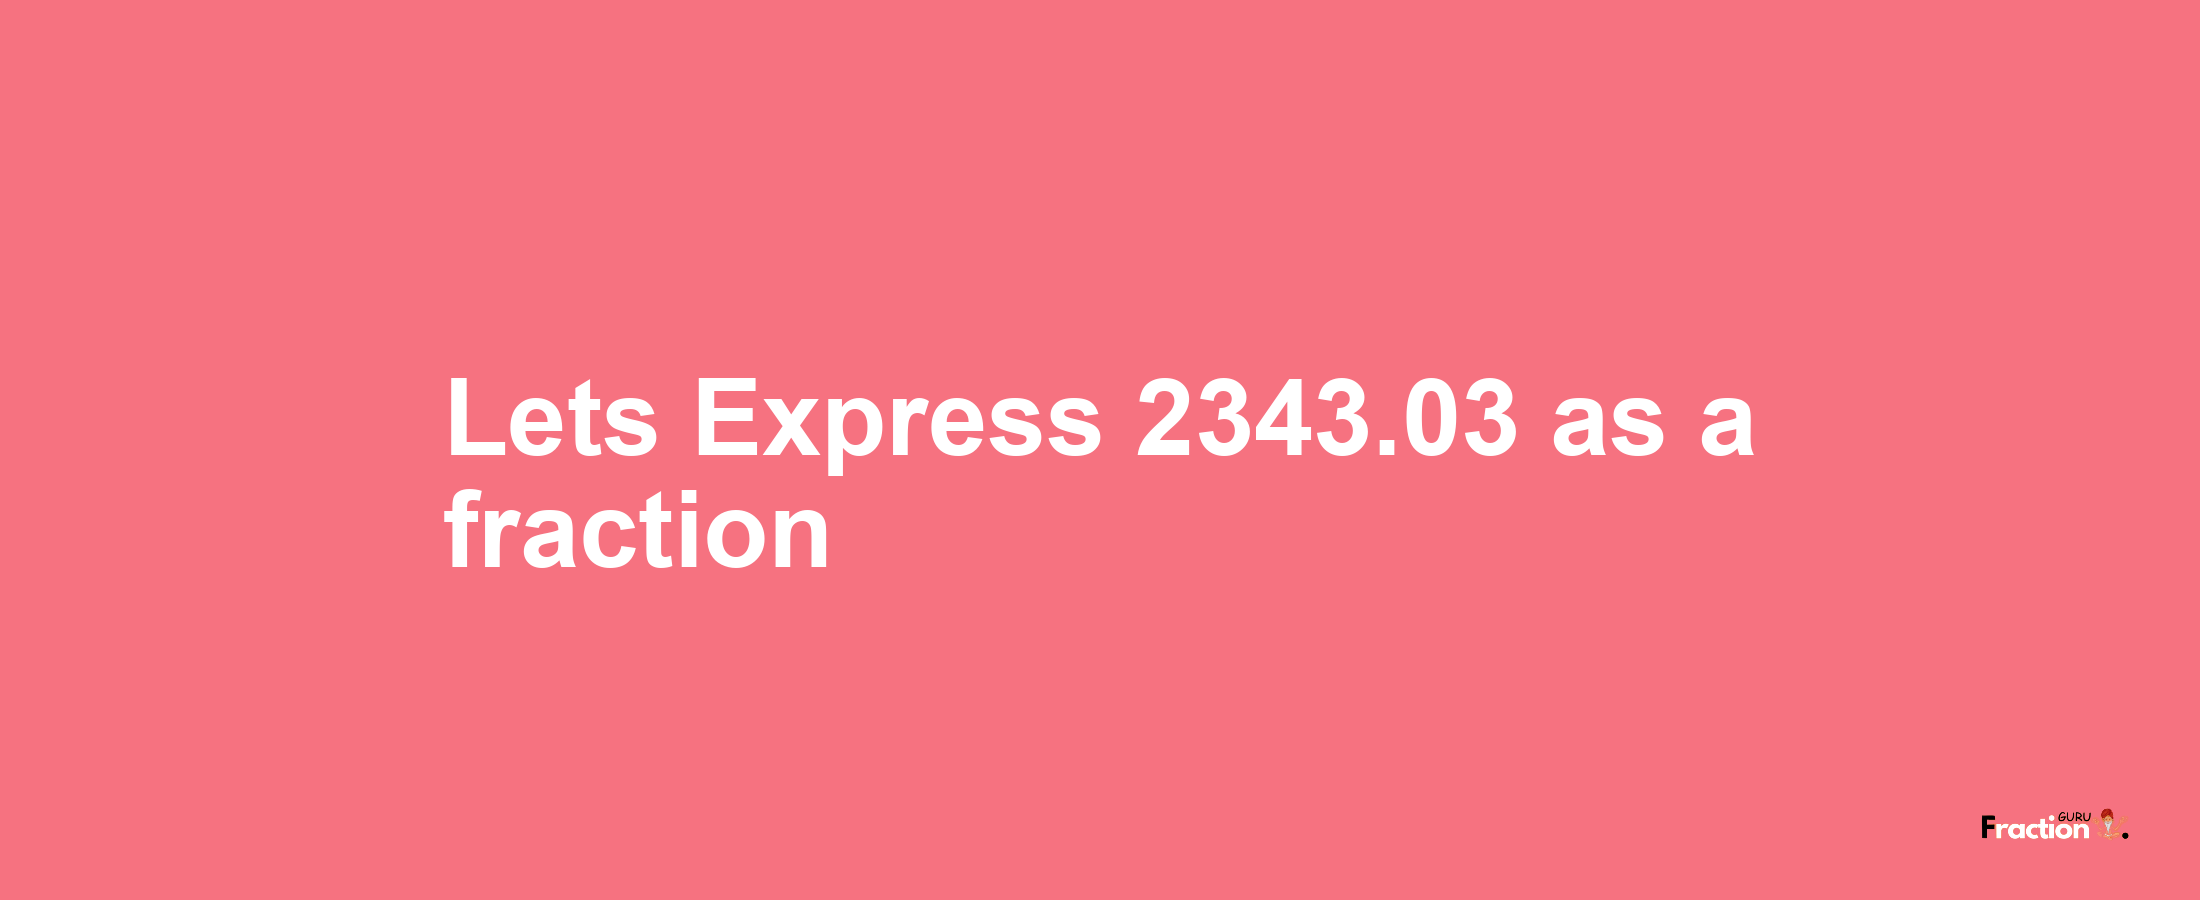 Lets Express 2343.03 as afraction